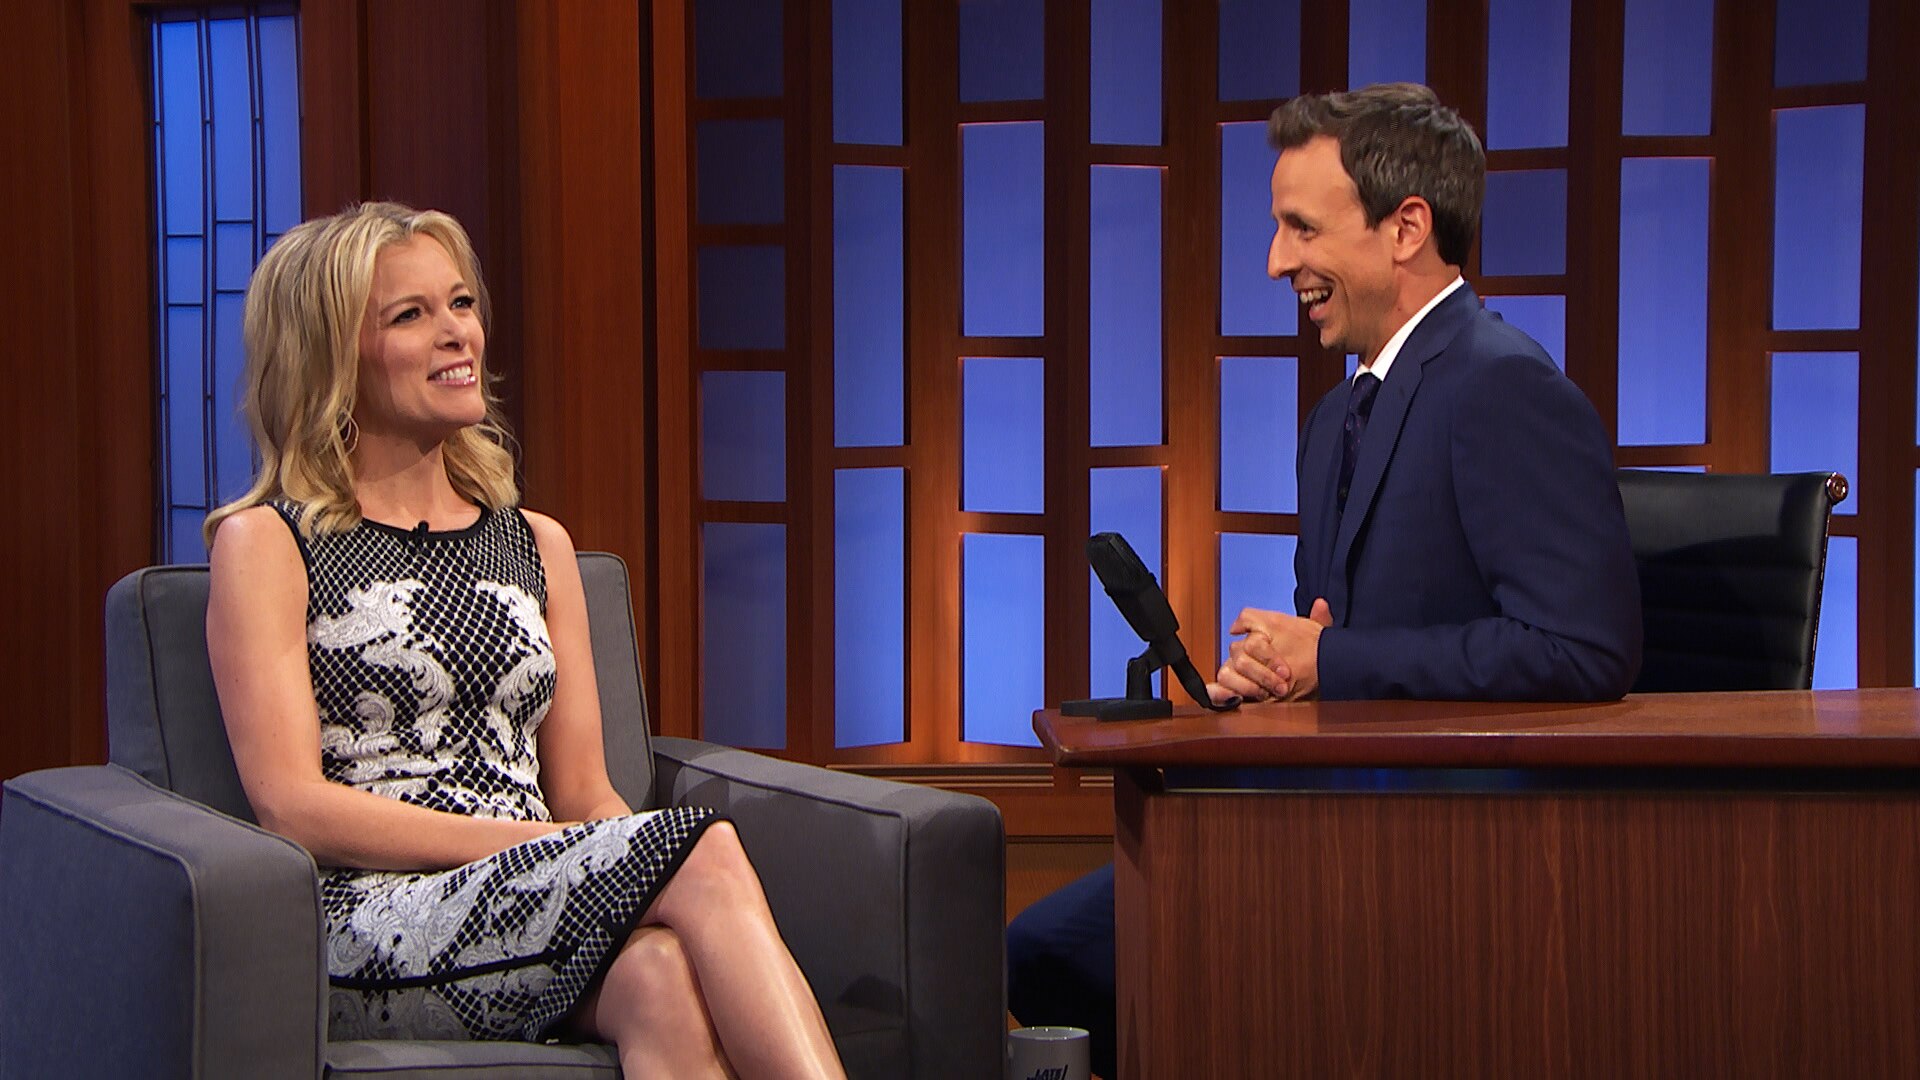 Watch Late Night with Seth Meyers Interview: Megyn Kelly Interview, Part 1 - NBC.com